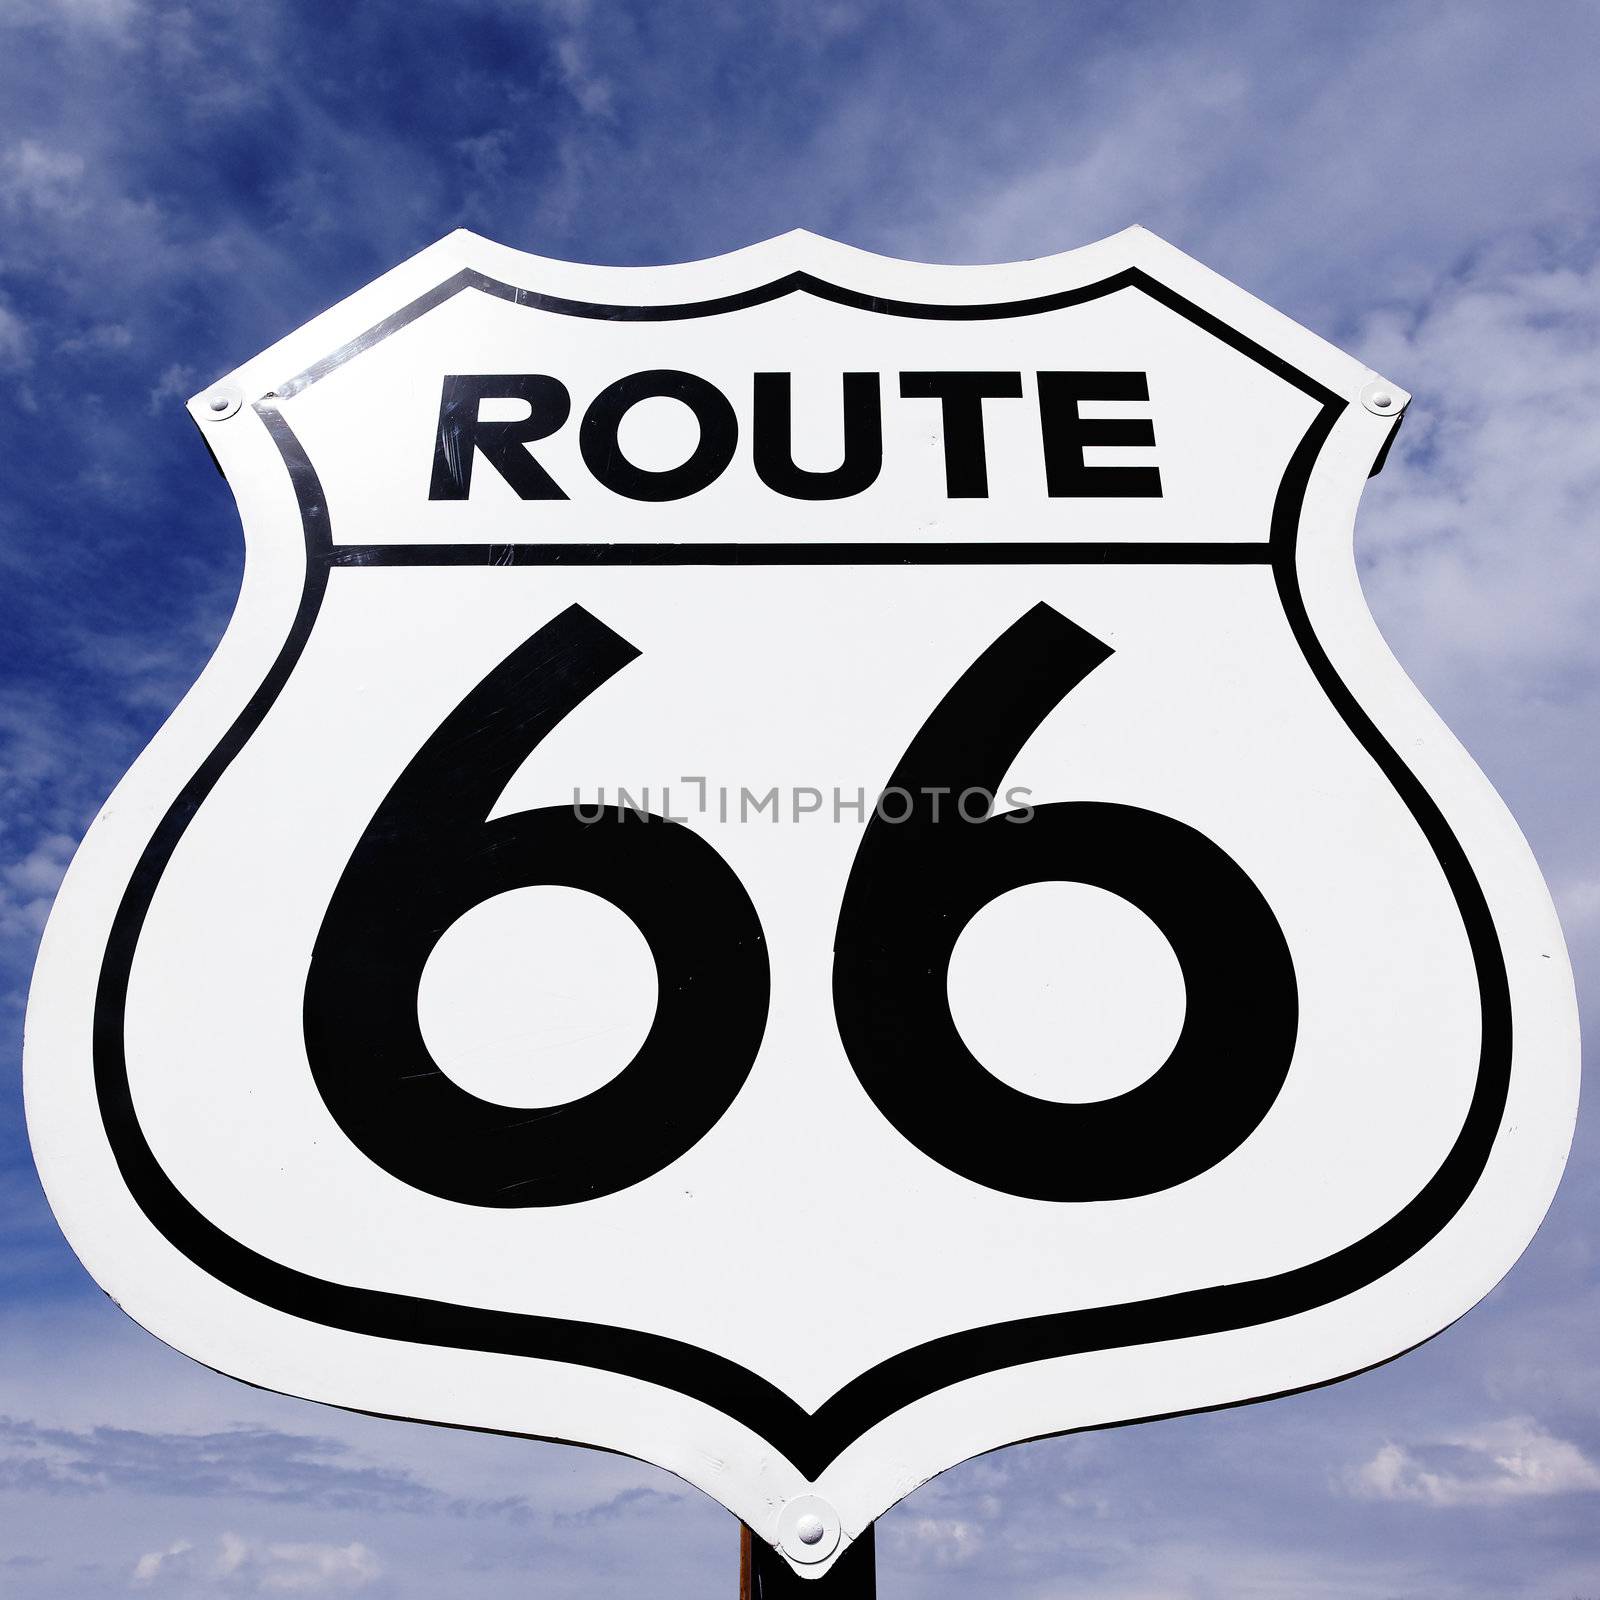 An old, antique, nostalgic route 66 sign